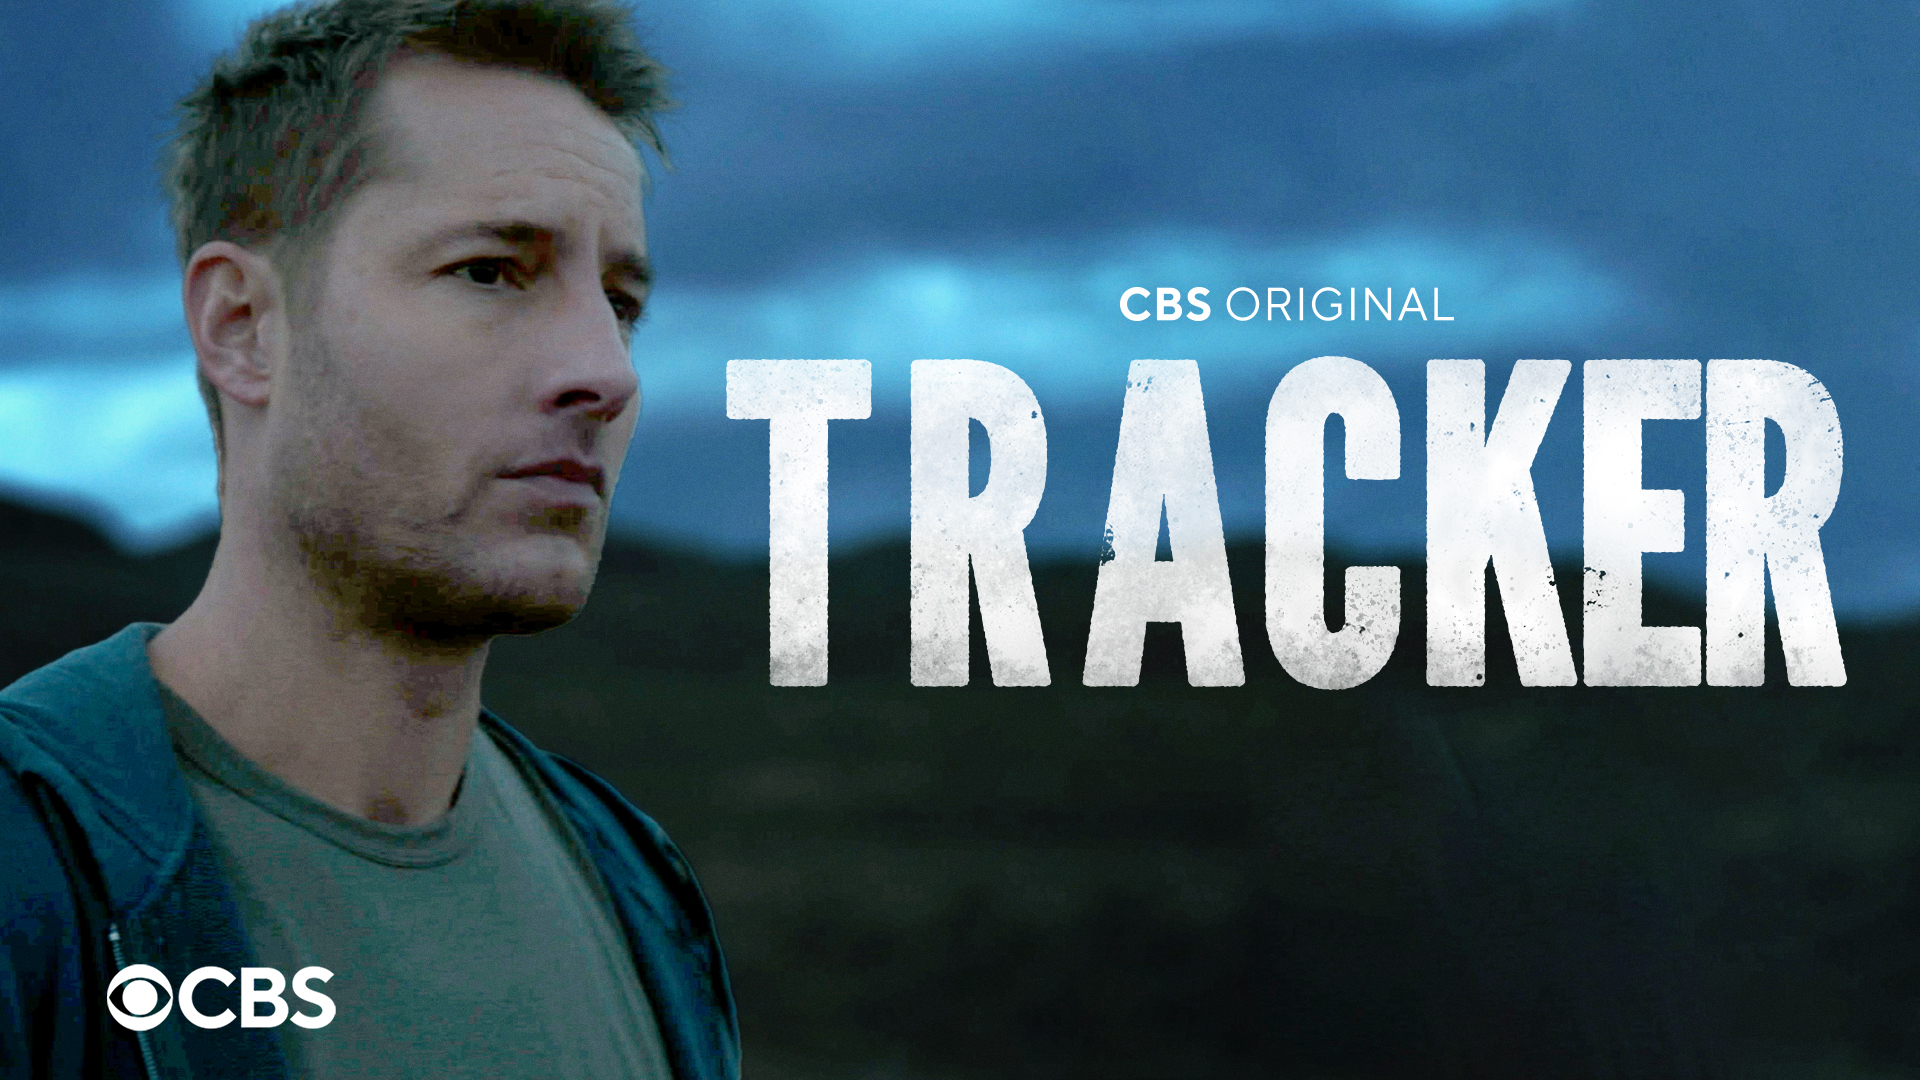 CBS Drops the First Trailer for "Tracker" Starring Justin Hartley as Reward Seeker Colter Shaw